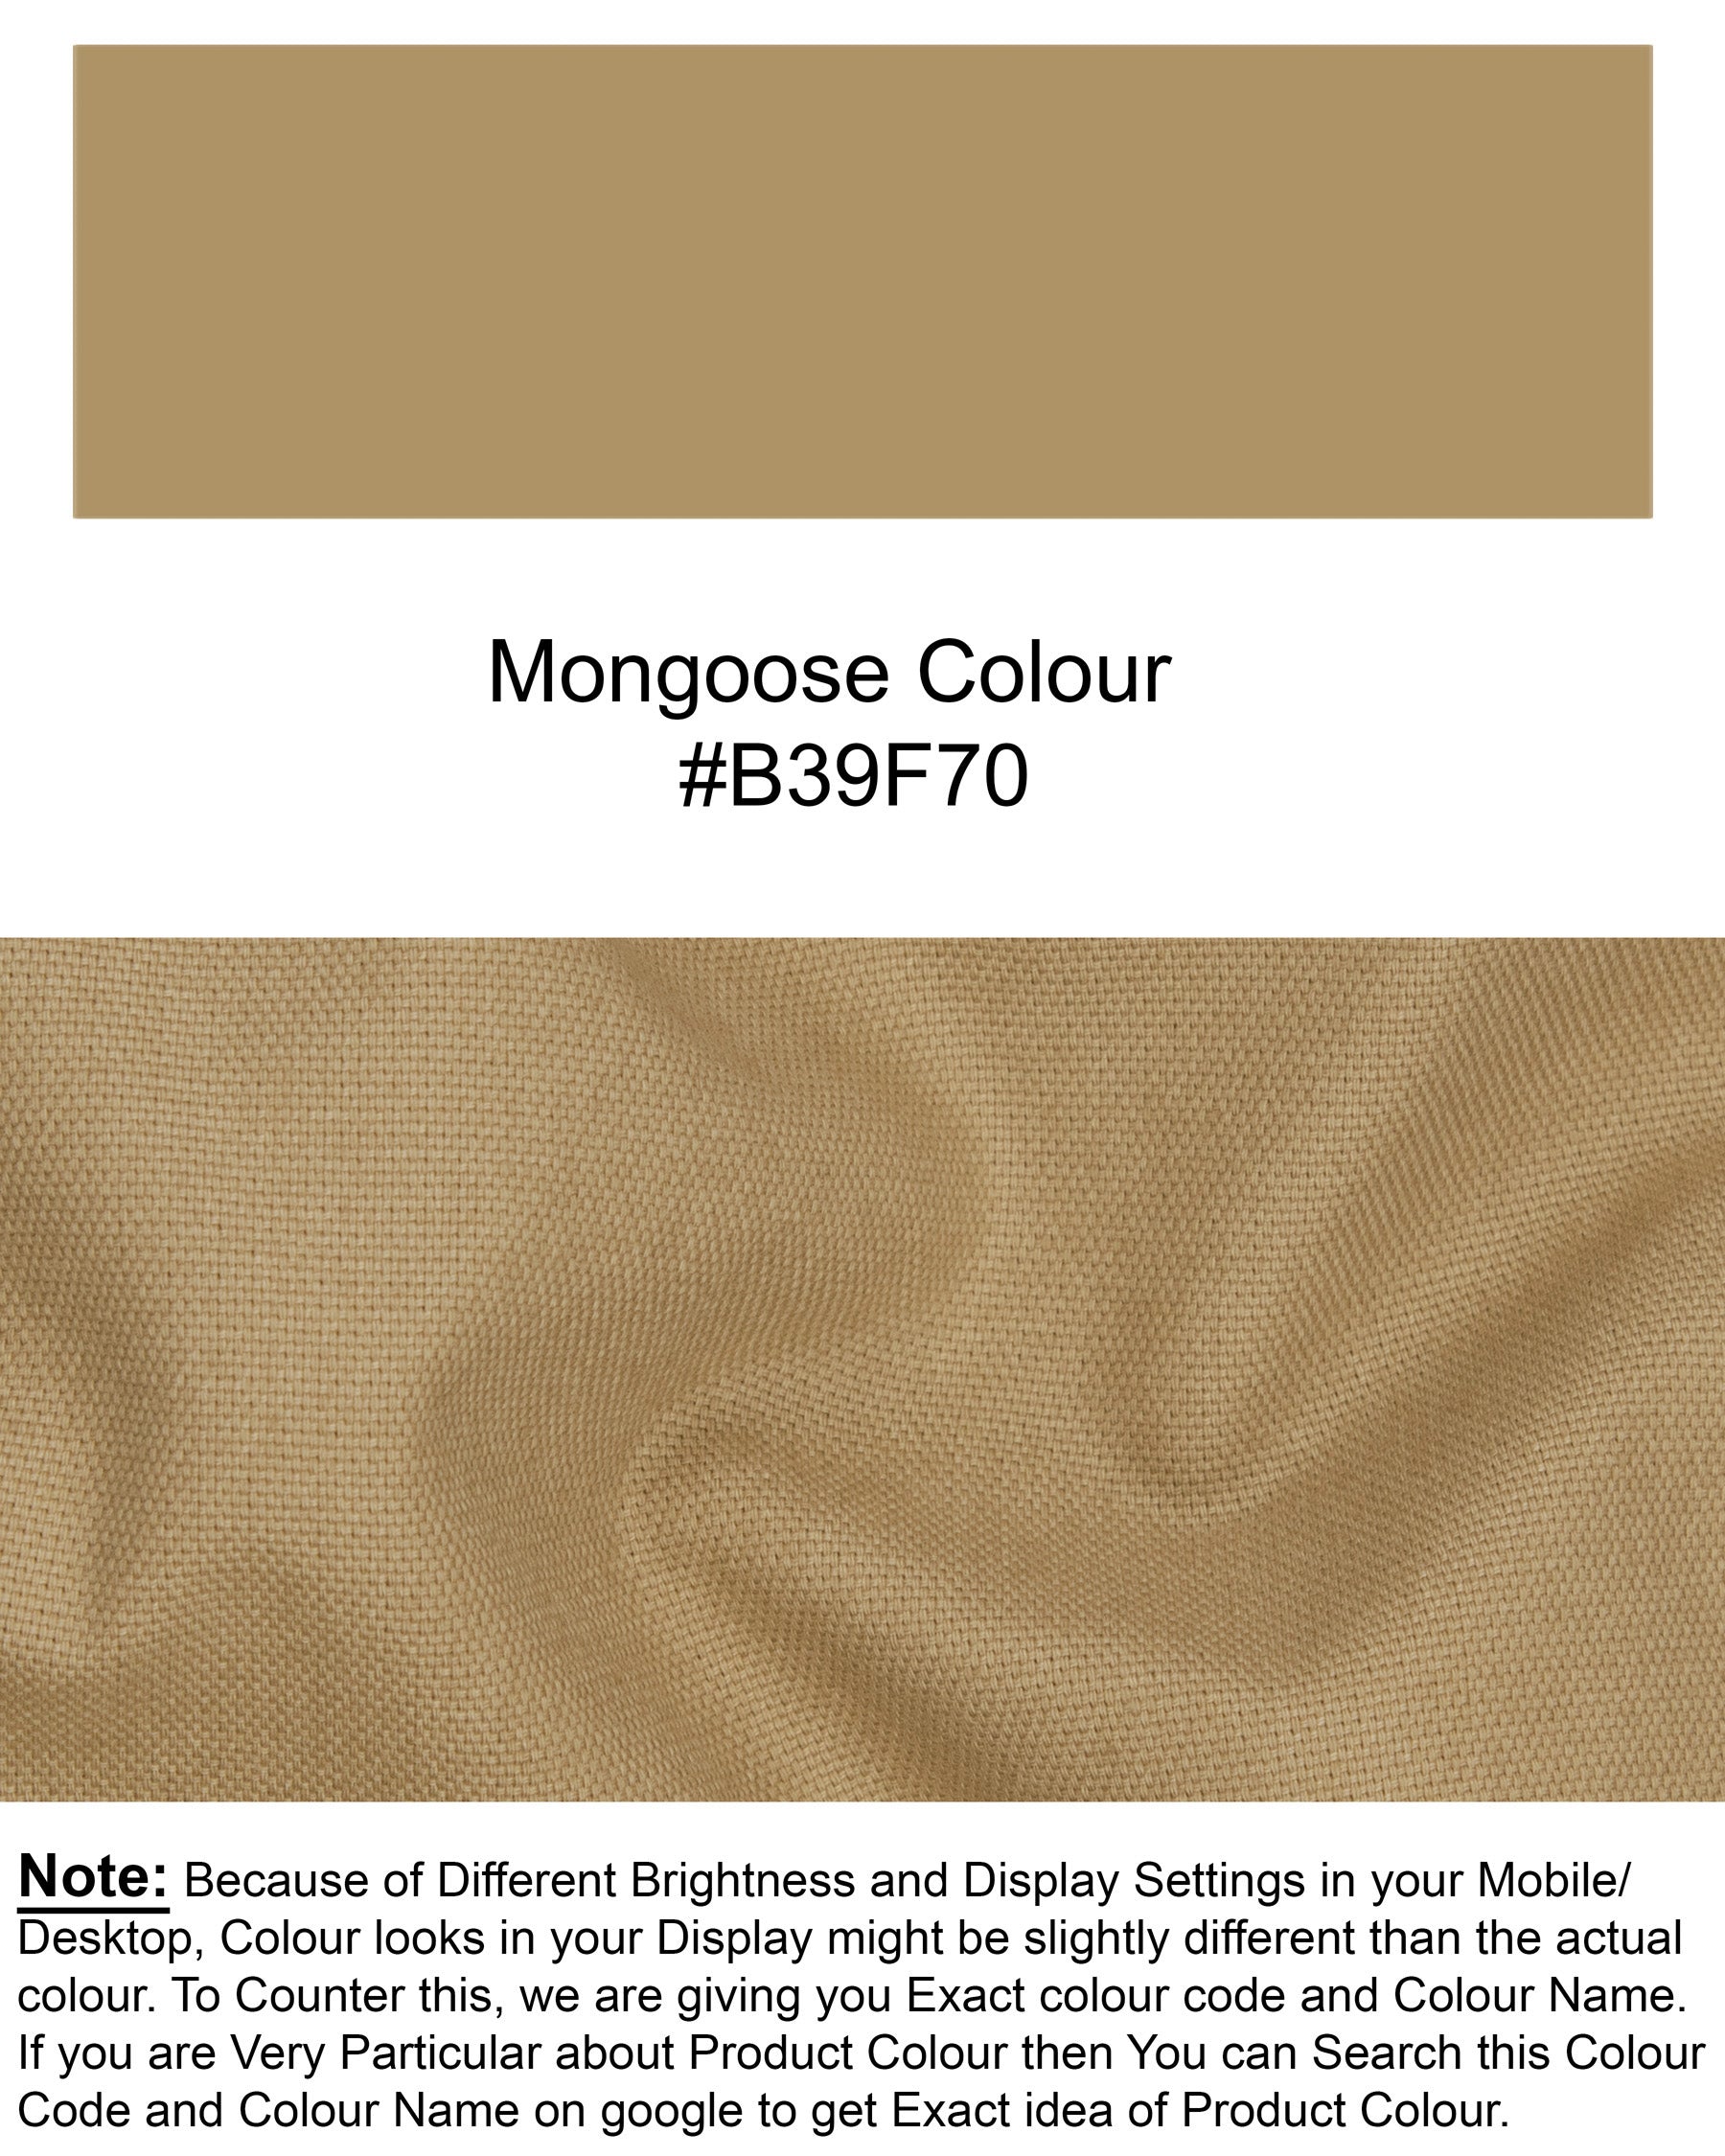 Mongoose Cream Stretchable Double Breasted Premium Cotton Blazer BL1266-DB-44, BL1266-DB-48, BL1266-DB-52, BL1266-DB-54, BL1266-DB-56, BL1266-DB-58, BL1266-DB-60, BL1266-DB-36, BL1266-DB-38, BL1266-DB-40, BL1266-DB-42, BL1266-DB-46, BL1266-DB-50